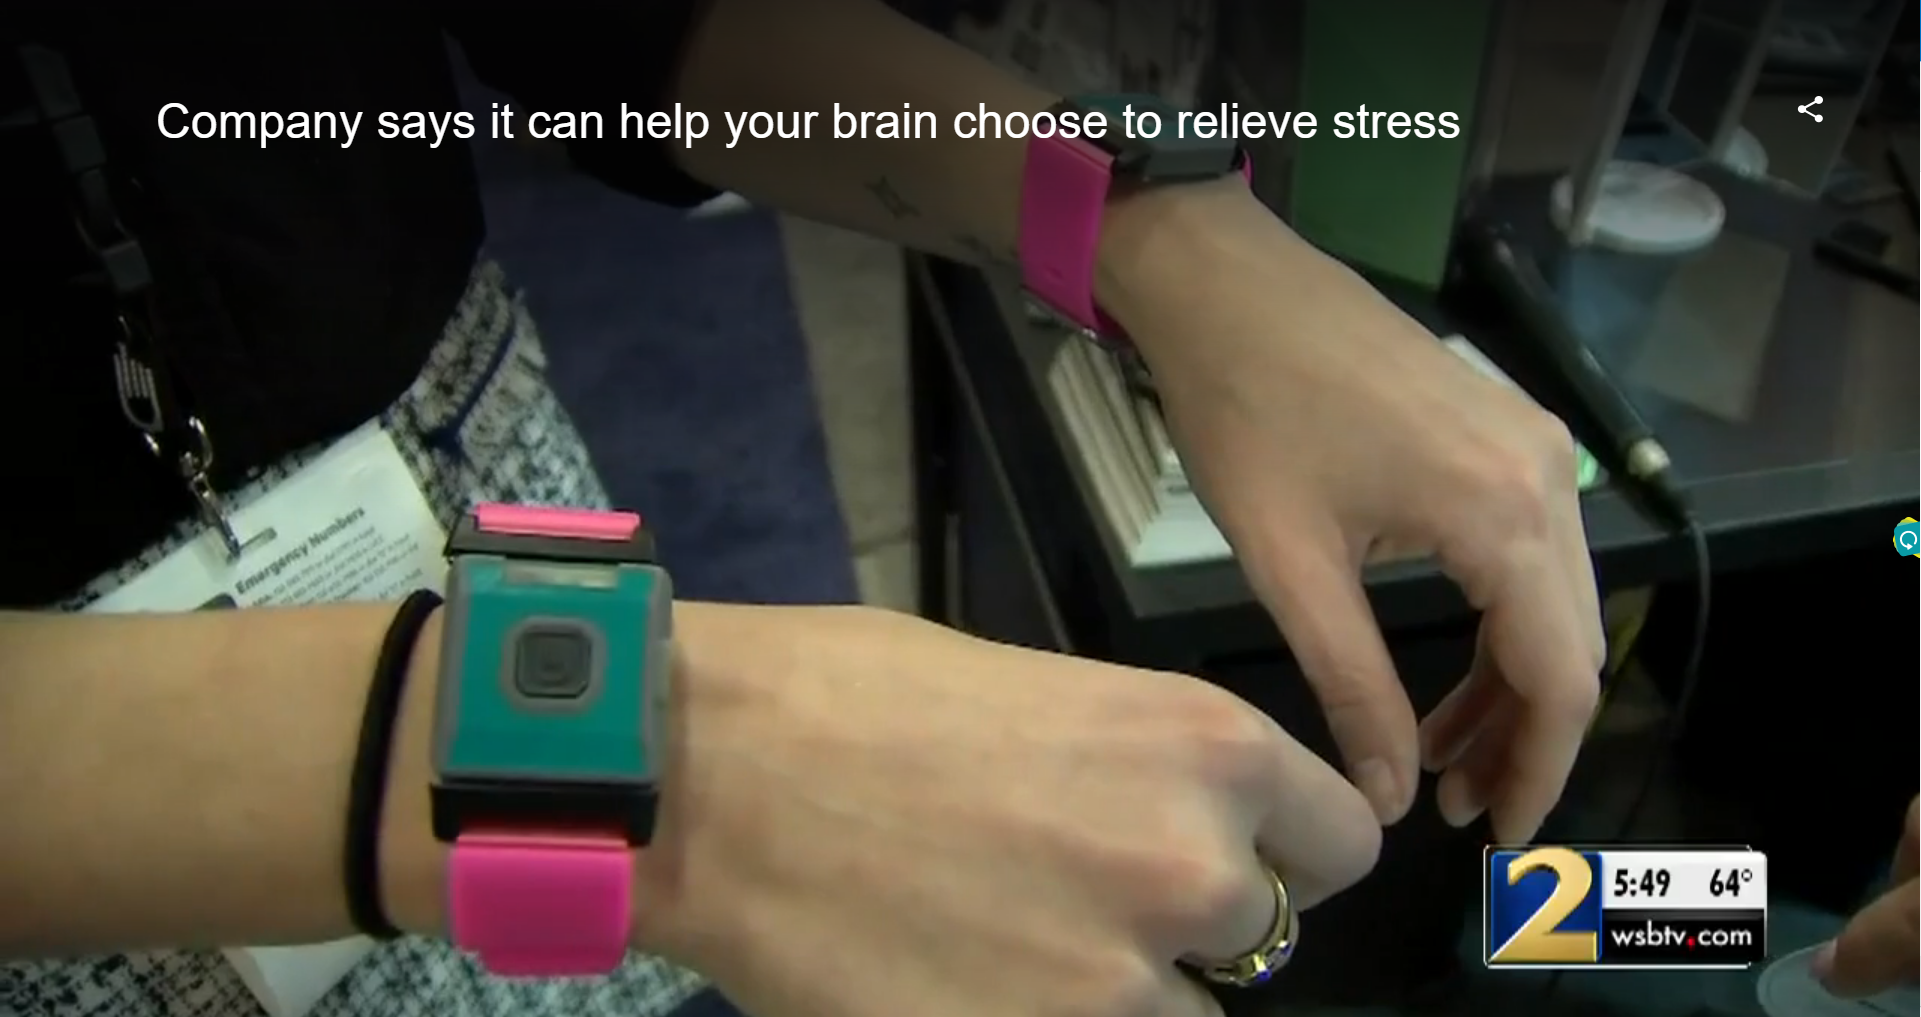 WSB TV - Company says it can help your brain choose to relieve stress